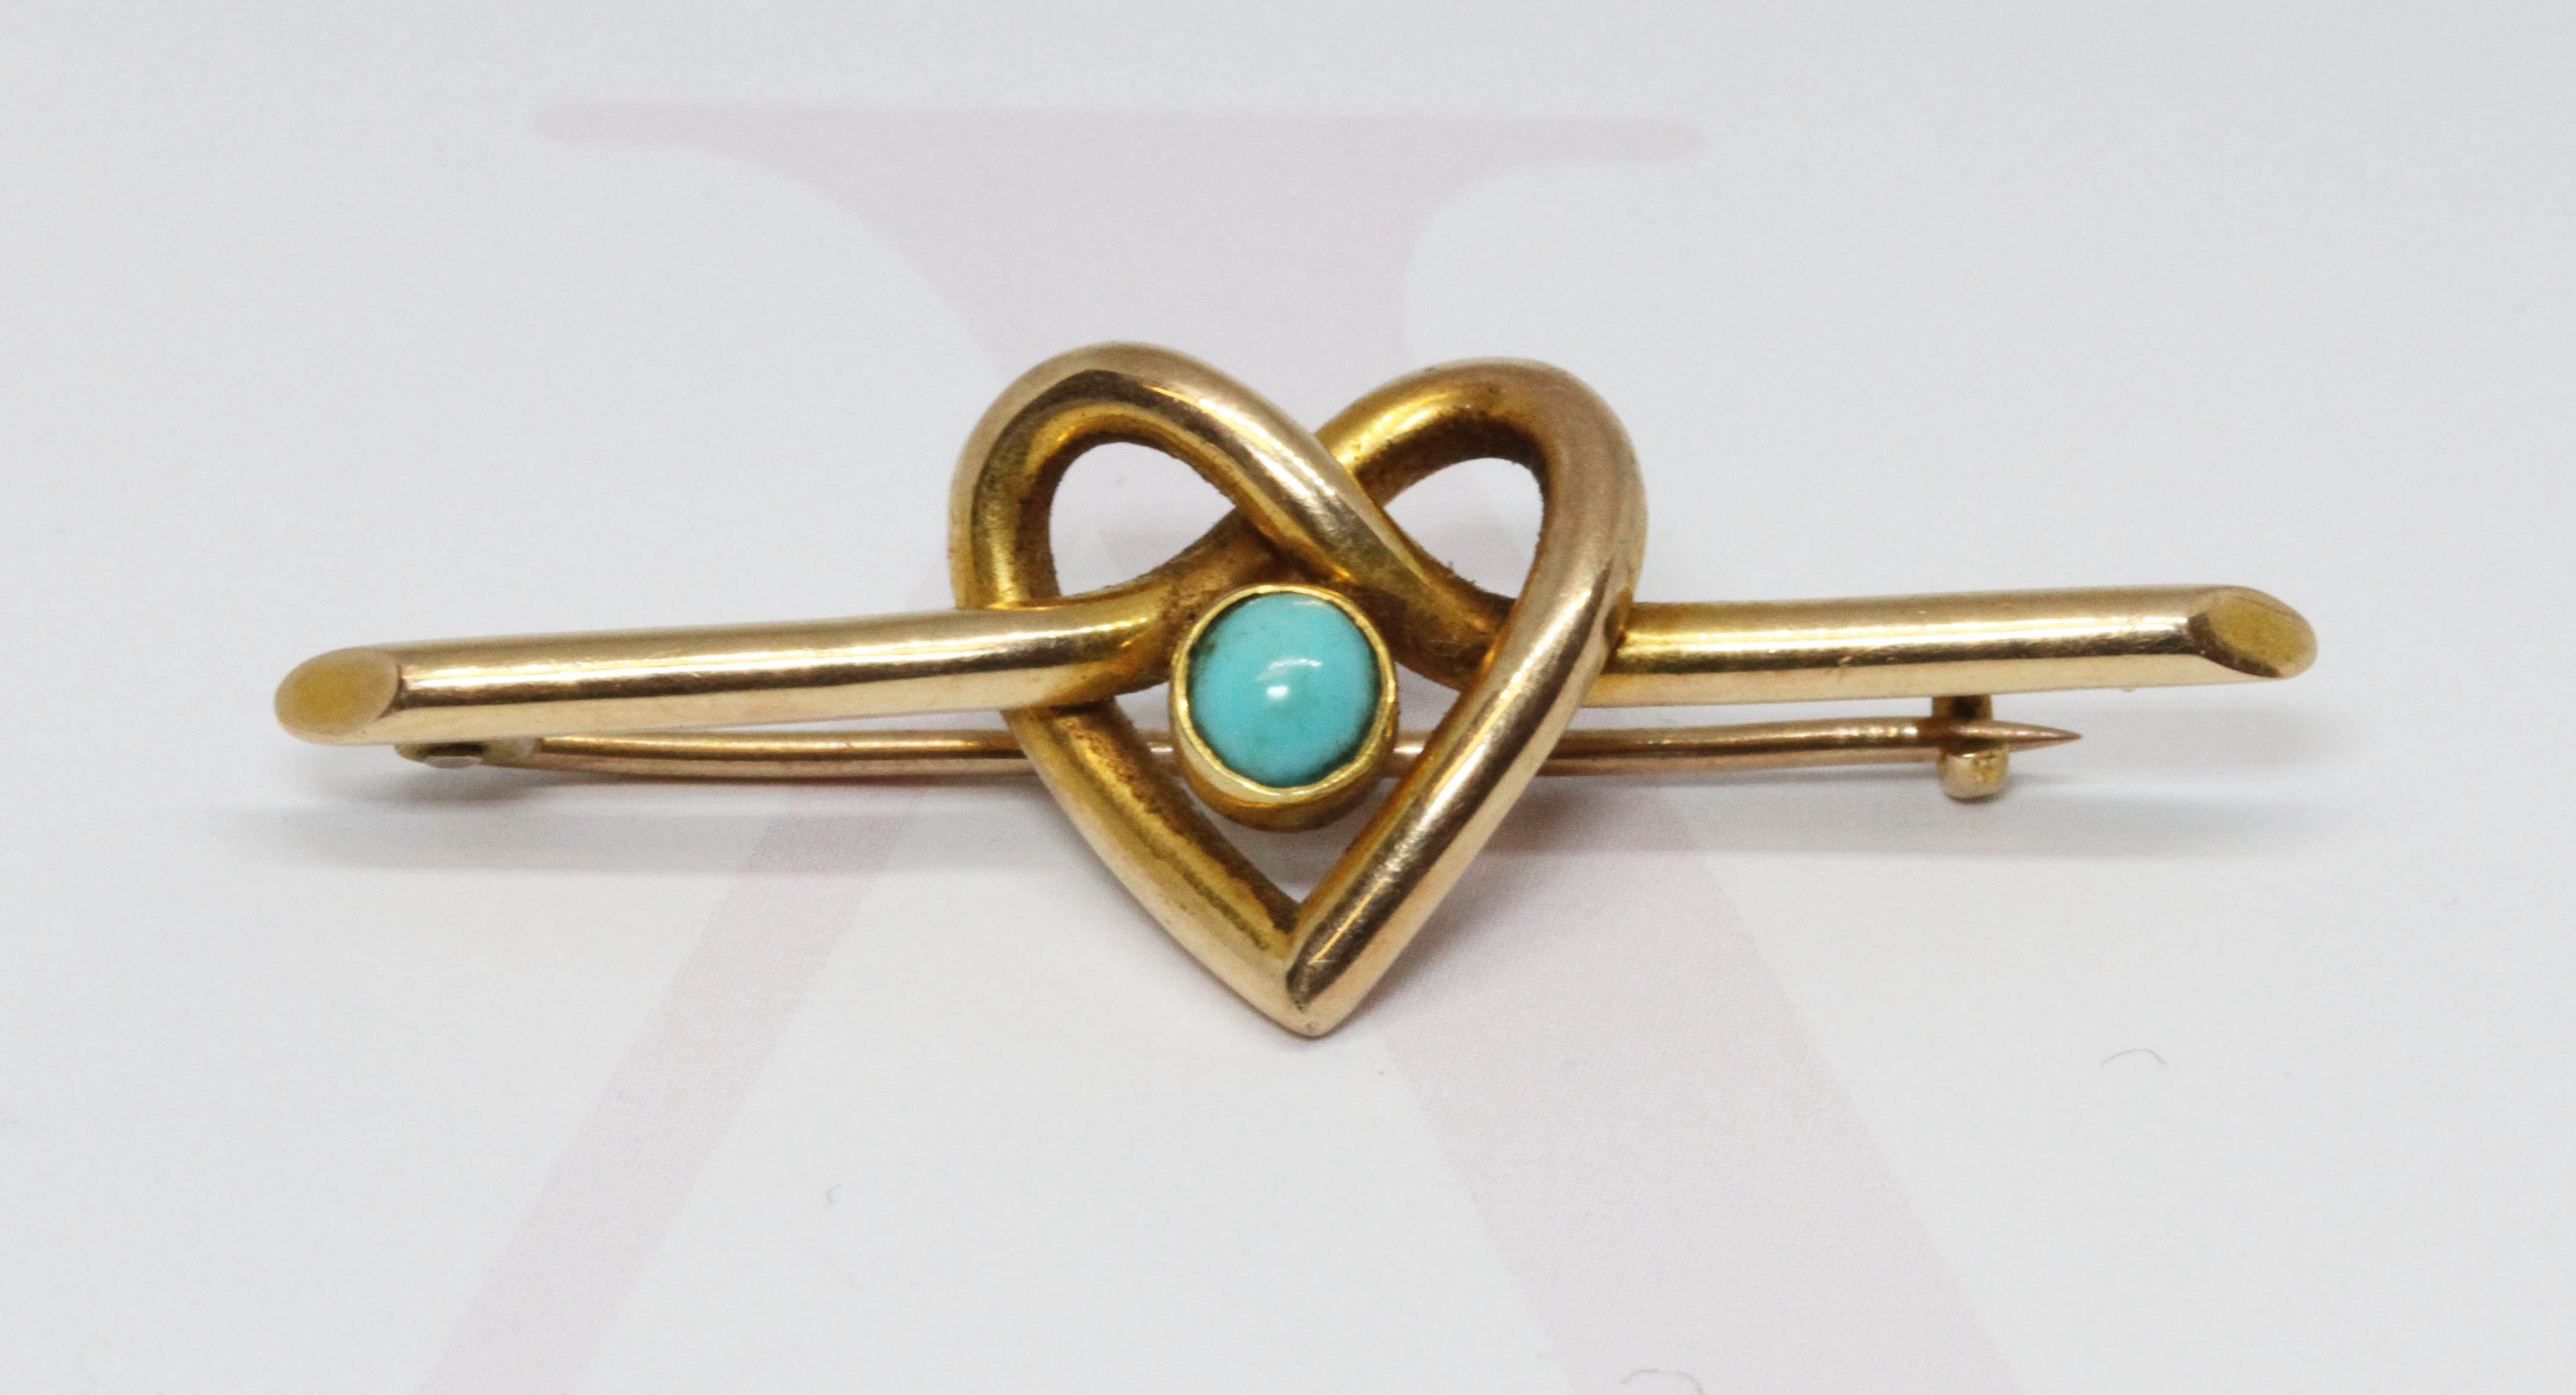 An Edwardian bar brooch formed from an entwined heart design with central turquoise cabochon, marked